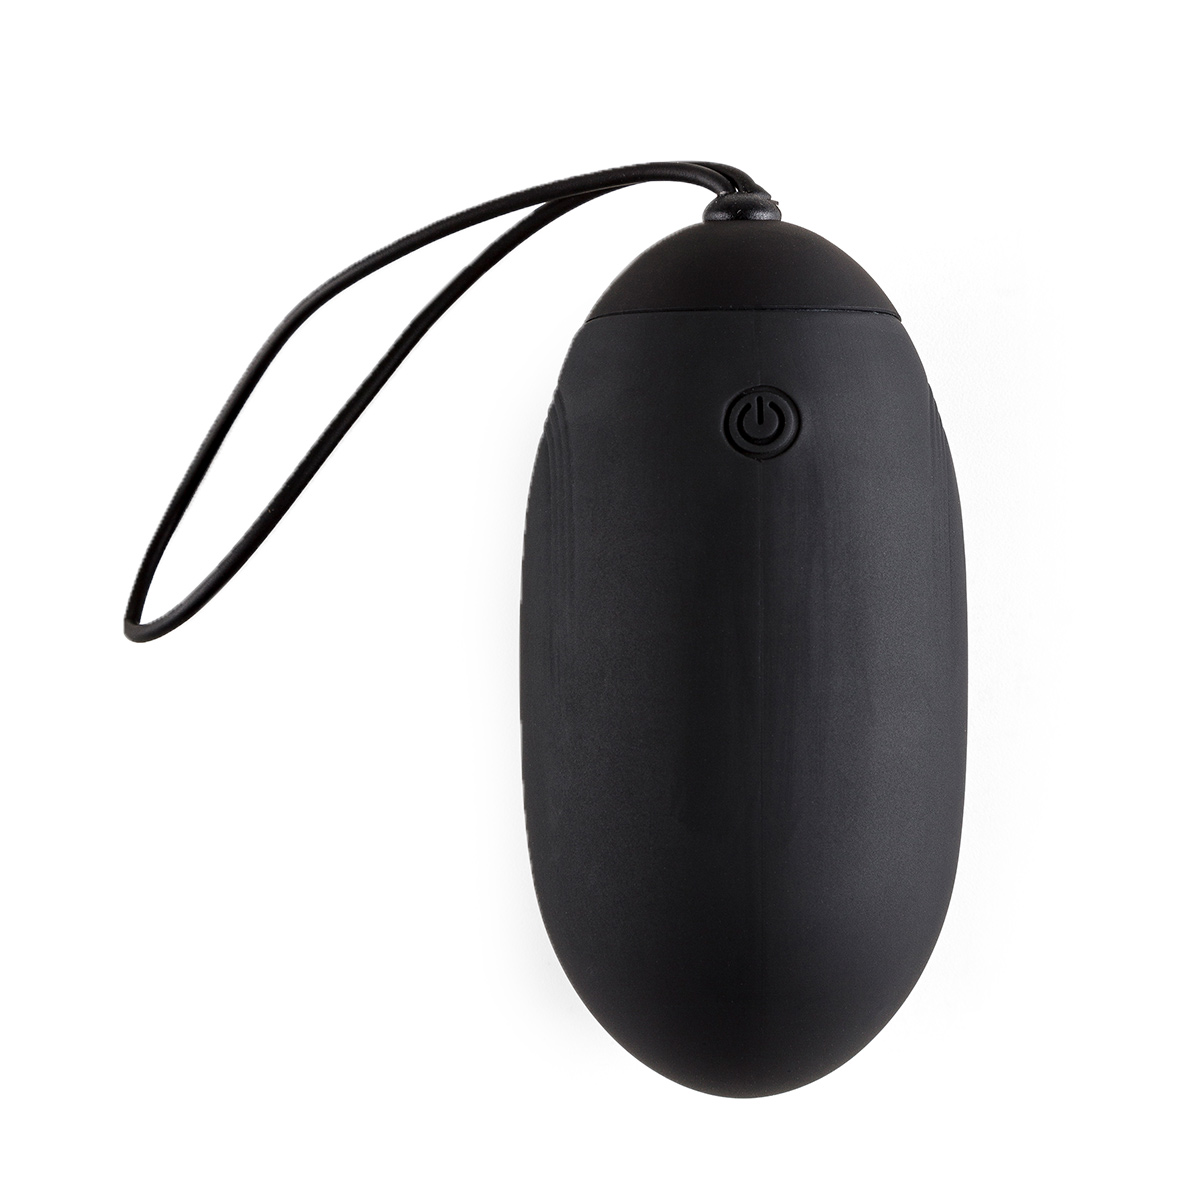 Rechargeable-Remote-Control-Egg-G6-Black-OPR-3090083-1